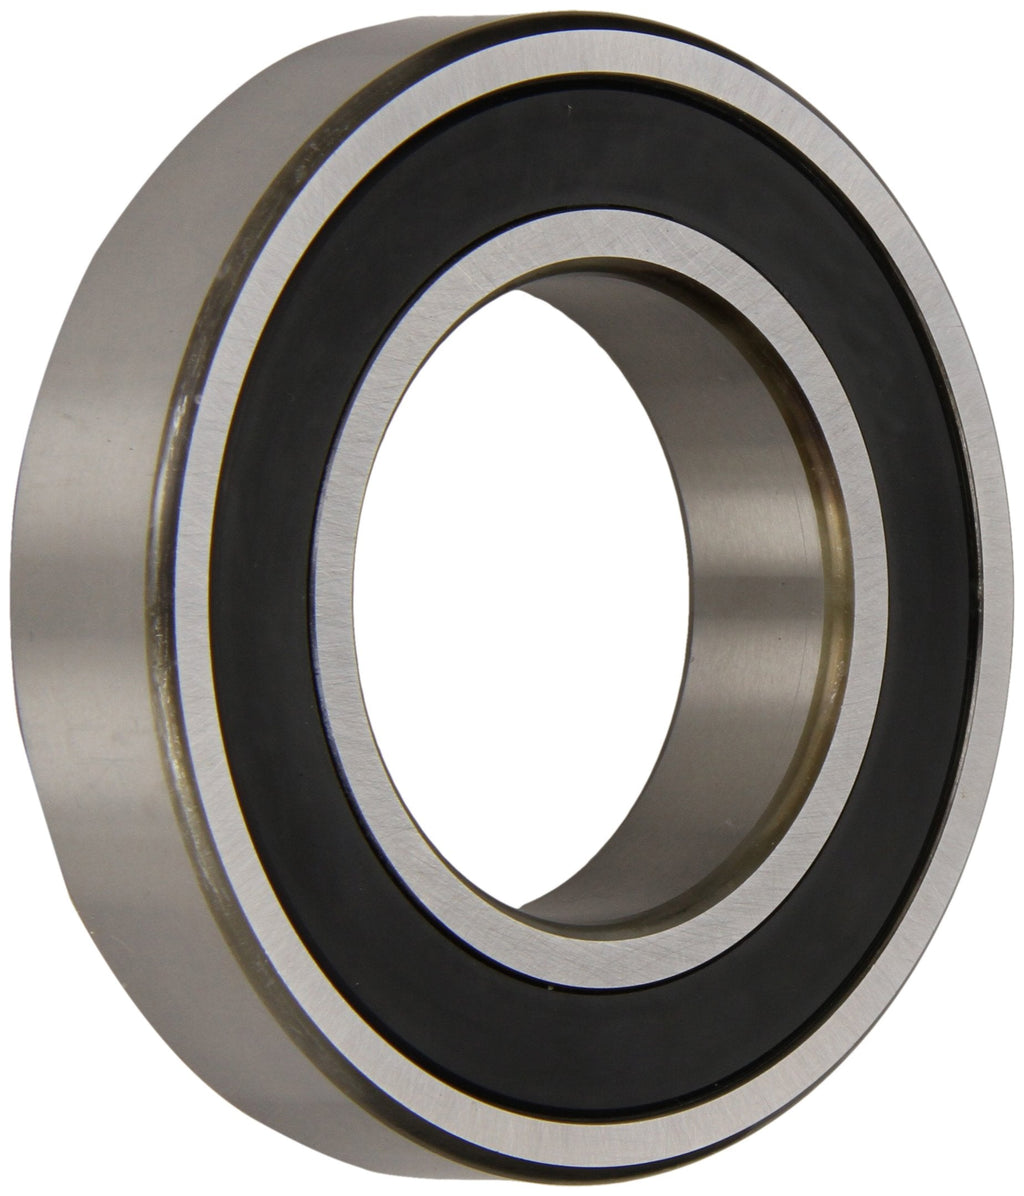  [AUSTRALIA] - NSK 6202VV Deep Groove Ball Bearing, Single Row, Double Sealed, Non-Contact, Pressed Steel Cage, Normal Clearance, Metric, 15mm Bore, 35mm OD, 11mm Width, 20000rpm Maximum Rotational Speed, 843lbf Static Load Capacity, 1720lbf Dynamic Load Capacity